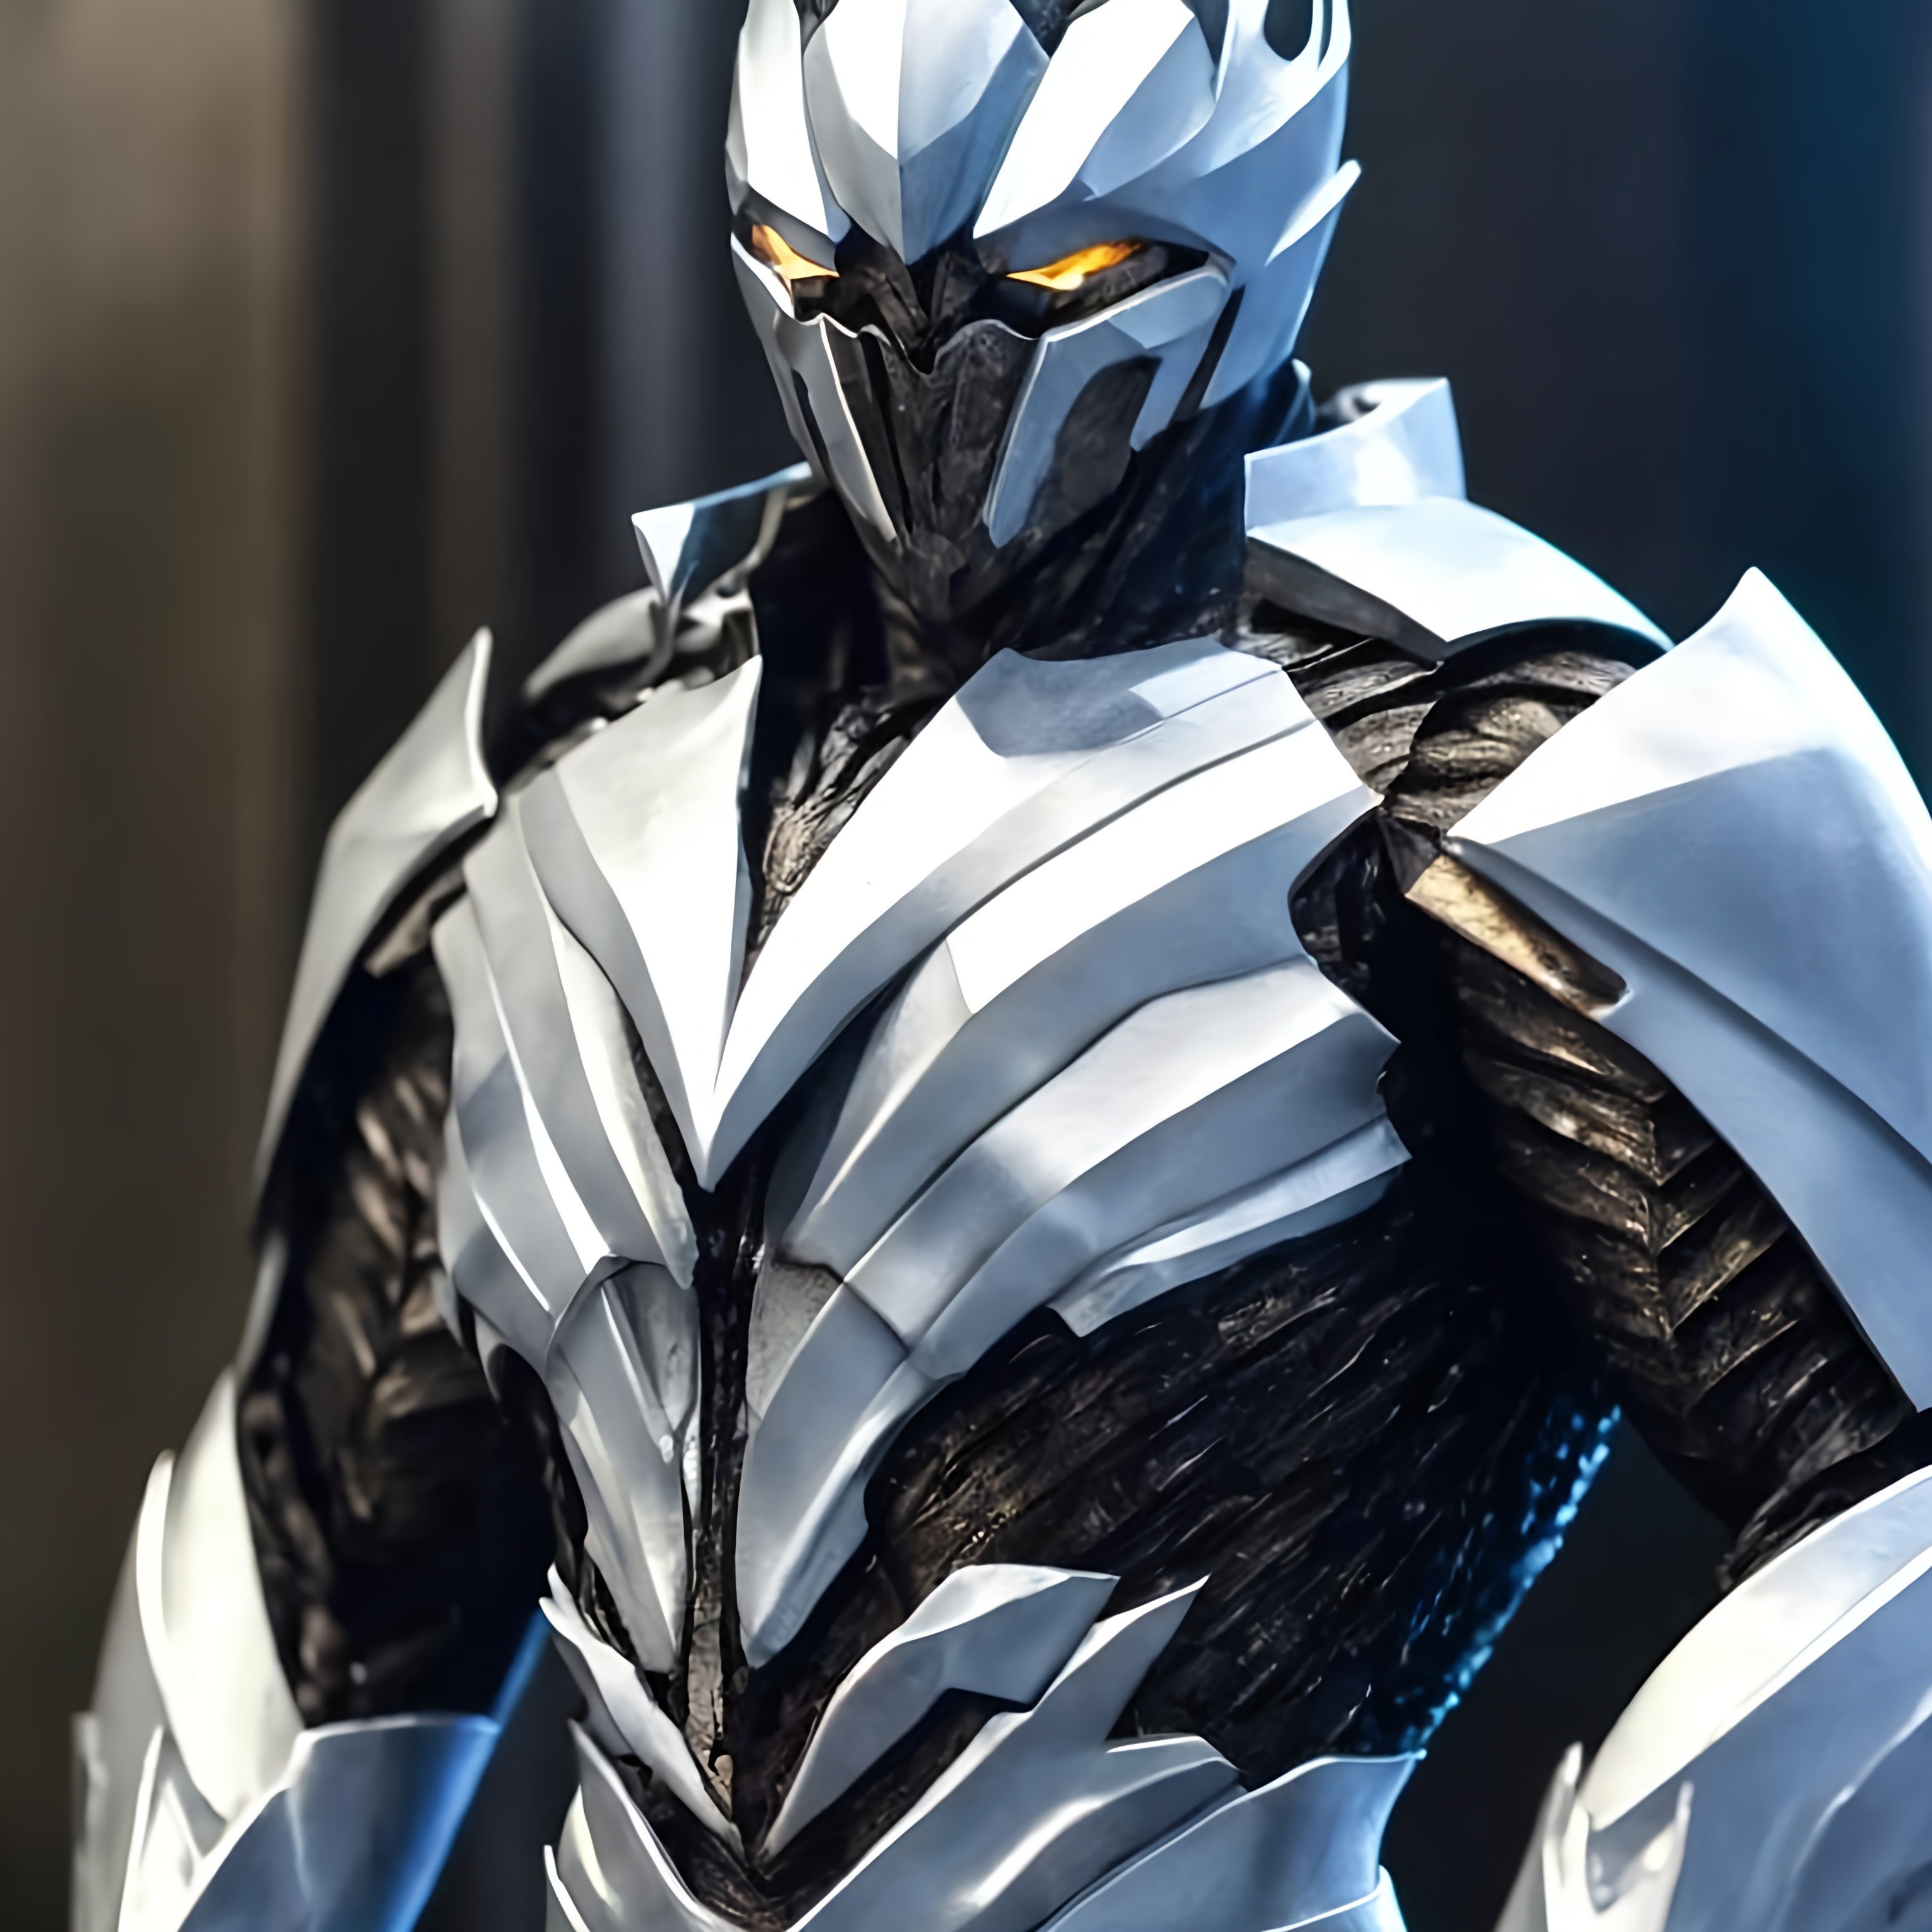 Savitar the god of speed white suit all colors cryst... | OpenArt